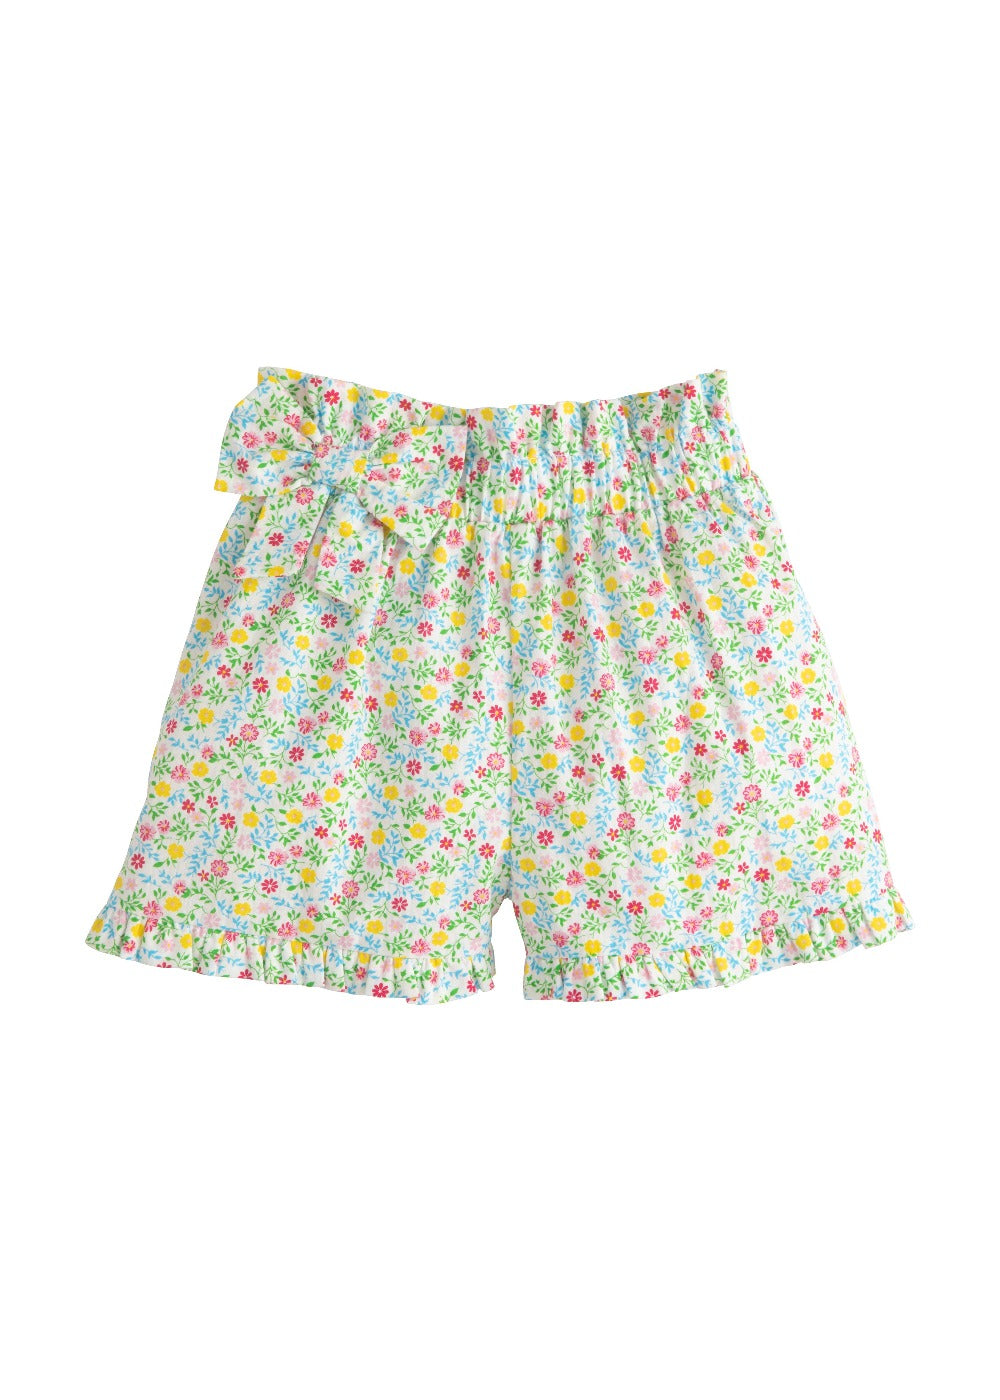 seguridadindustrialcr Traditional Paperbag Bow Short in Spring Floral